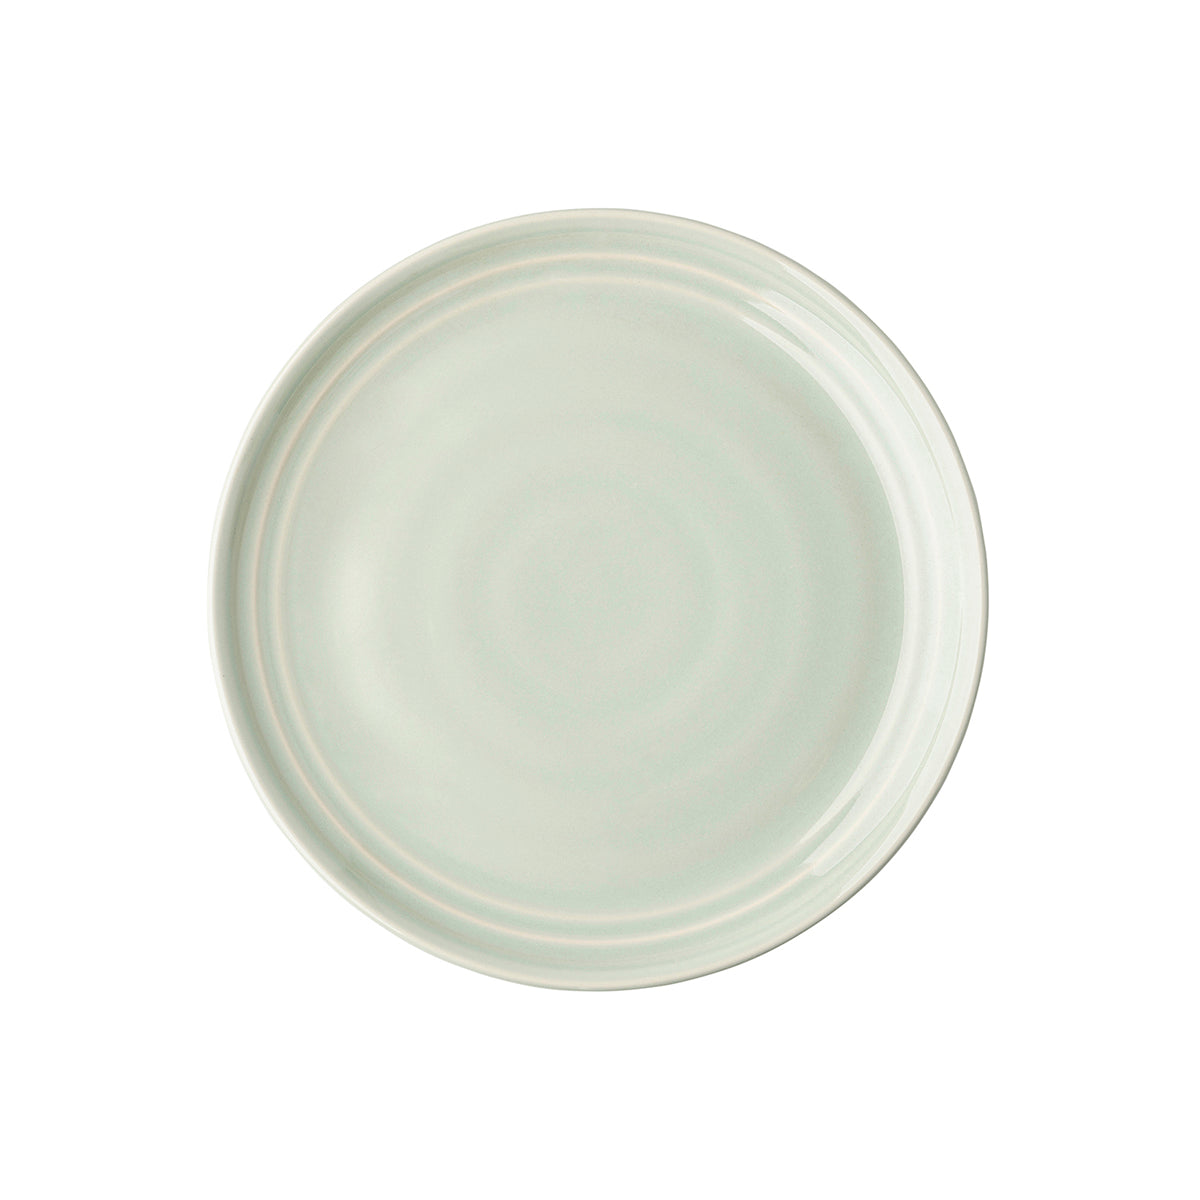 From our Bilbao Collection - Add an instant layer of texture and color to the table with this subtly elegant and eminently useful plate in our fresh green hue, which is ideal for everything from appetizers to tapas to side dishes (or even place cards)! You’ll want one for every placing setting, and then some.